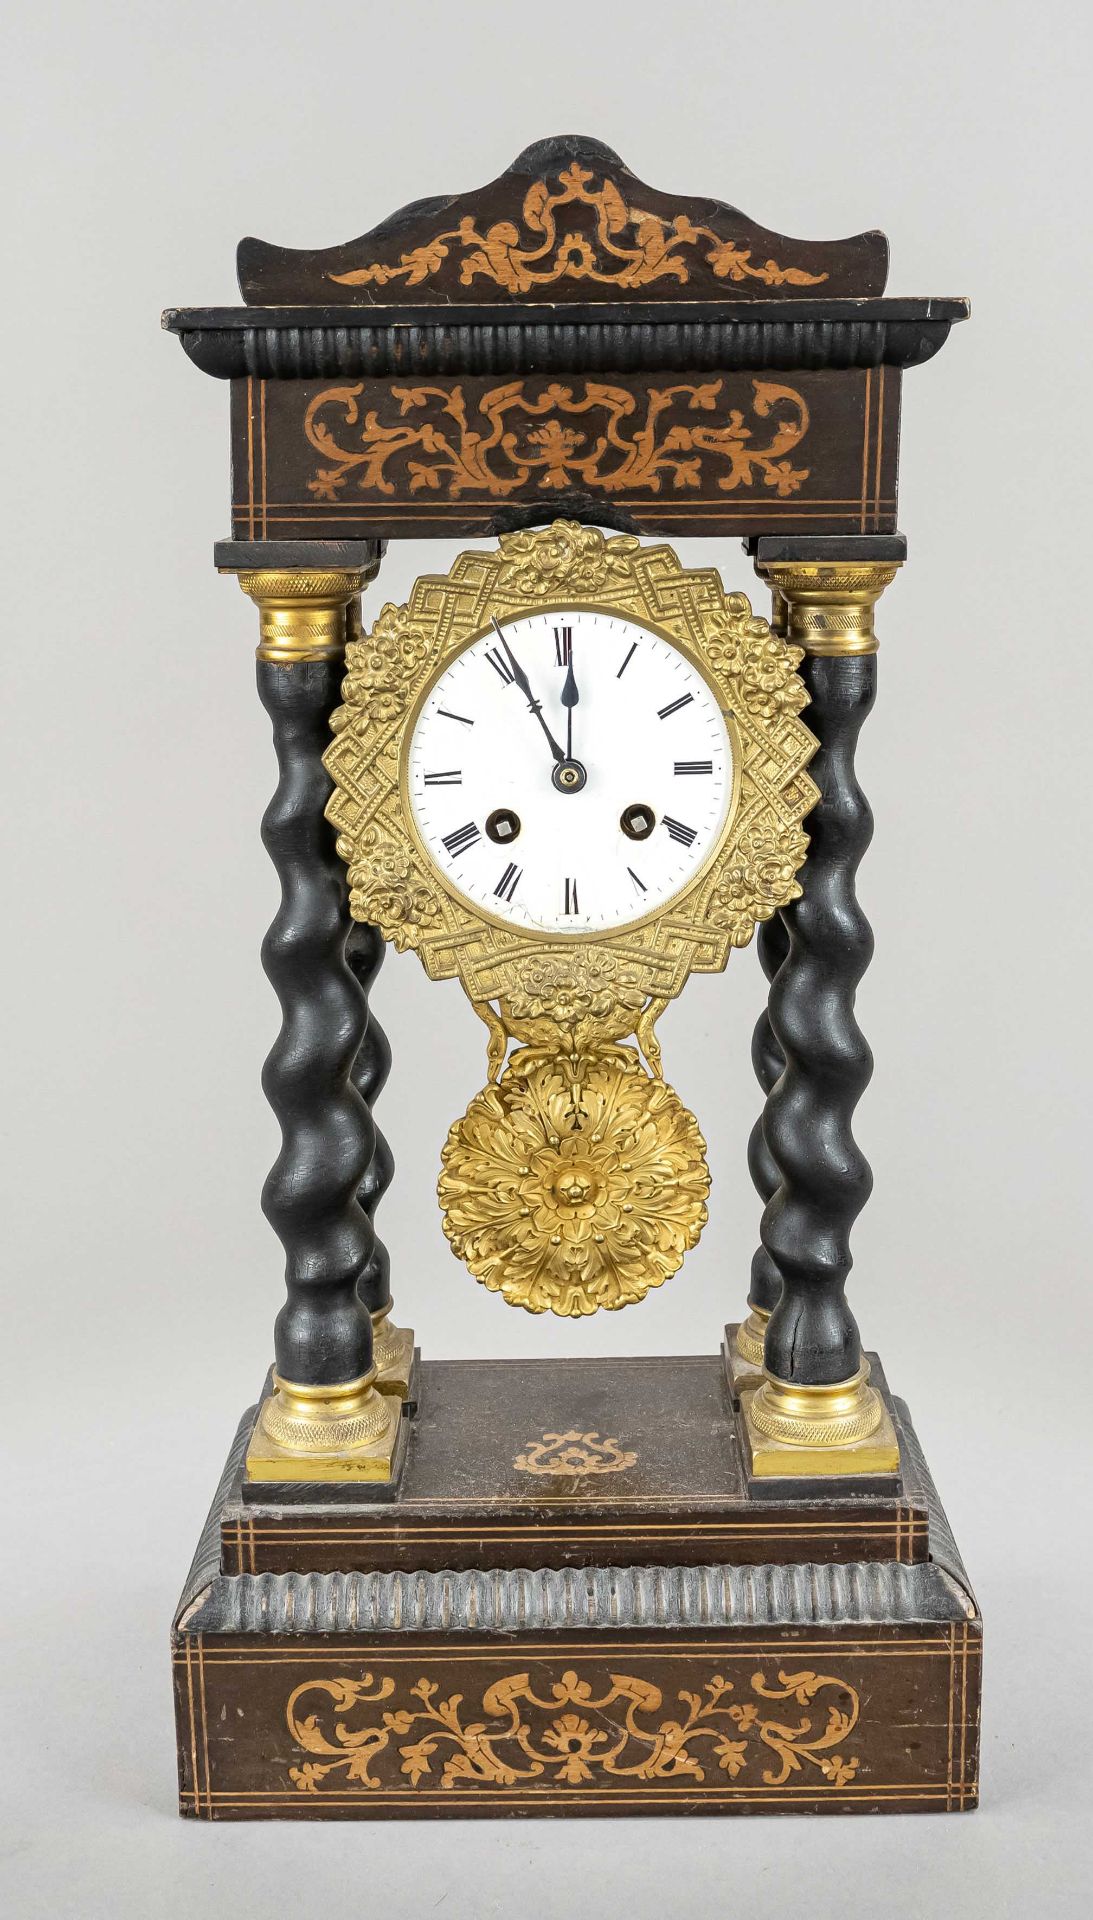 Portal clock, 2nd half of the 19th century, wood partly ebonized, corkscrew columns with gilded